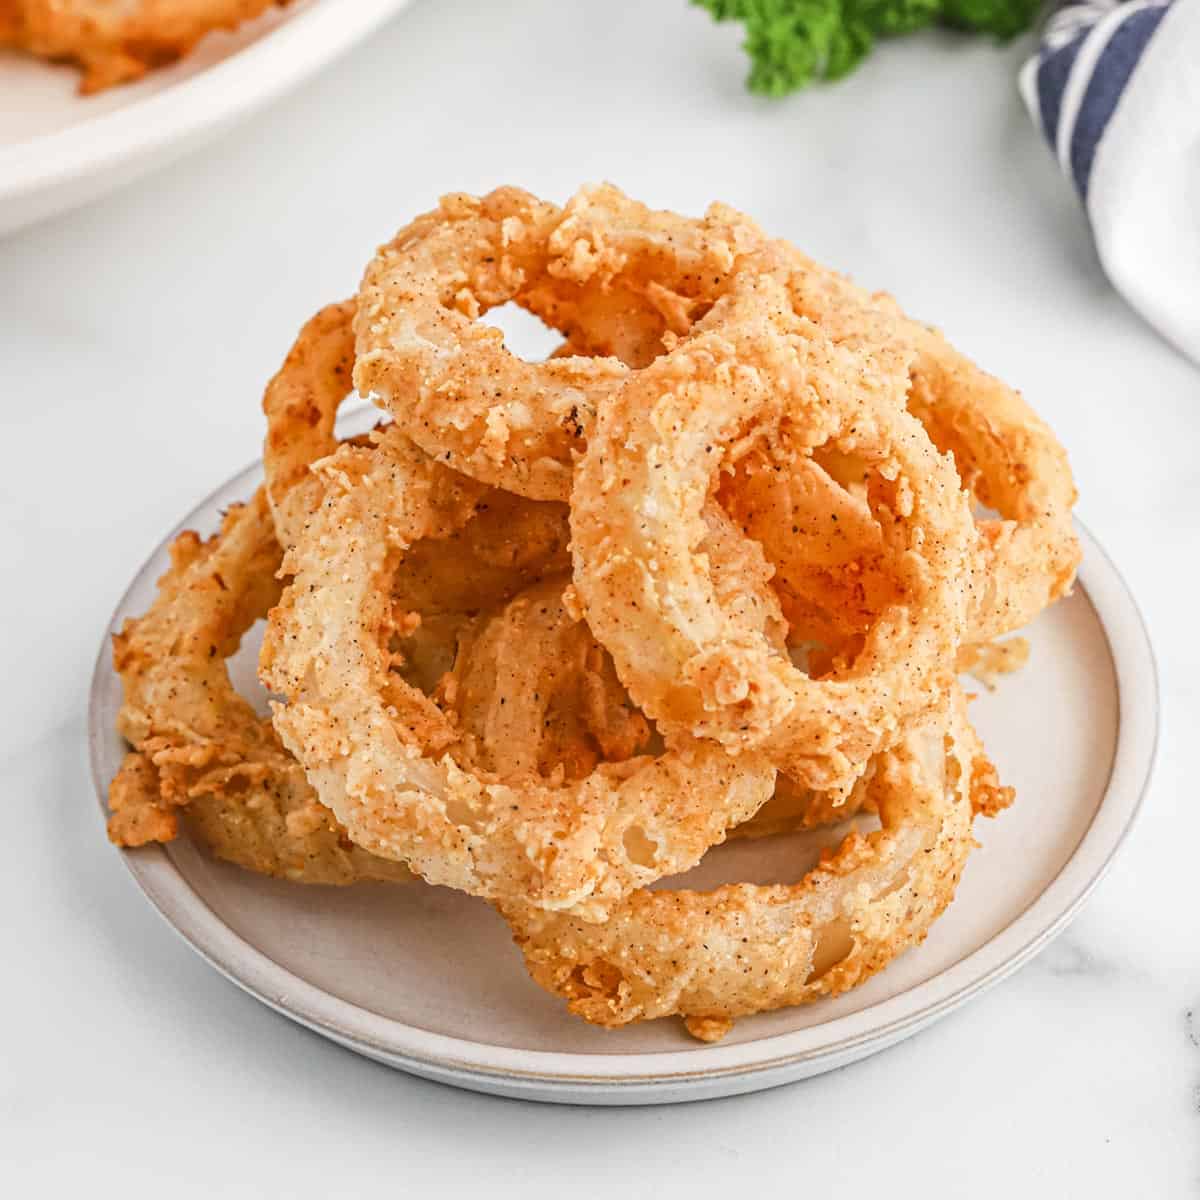 How To Make Perfect, Extra Crispy Homemade Onion Rings